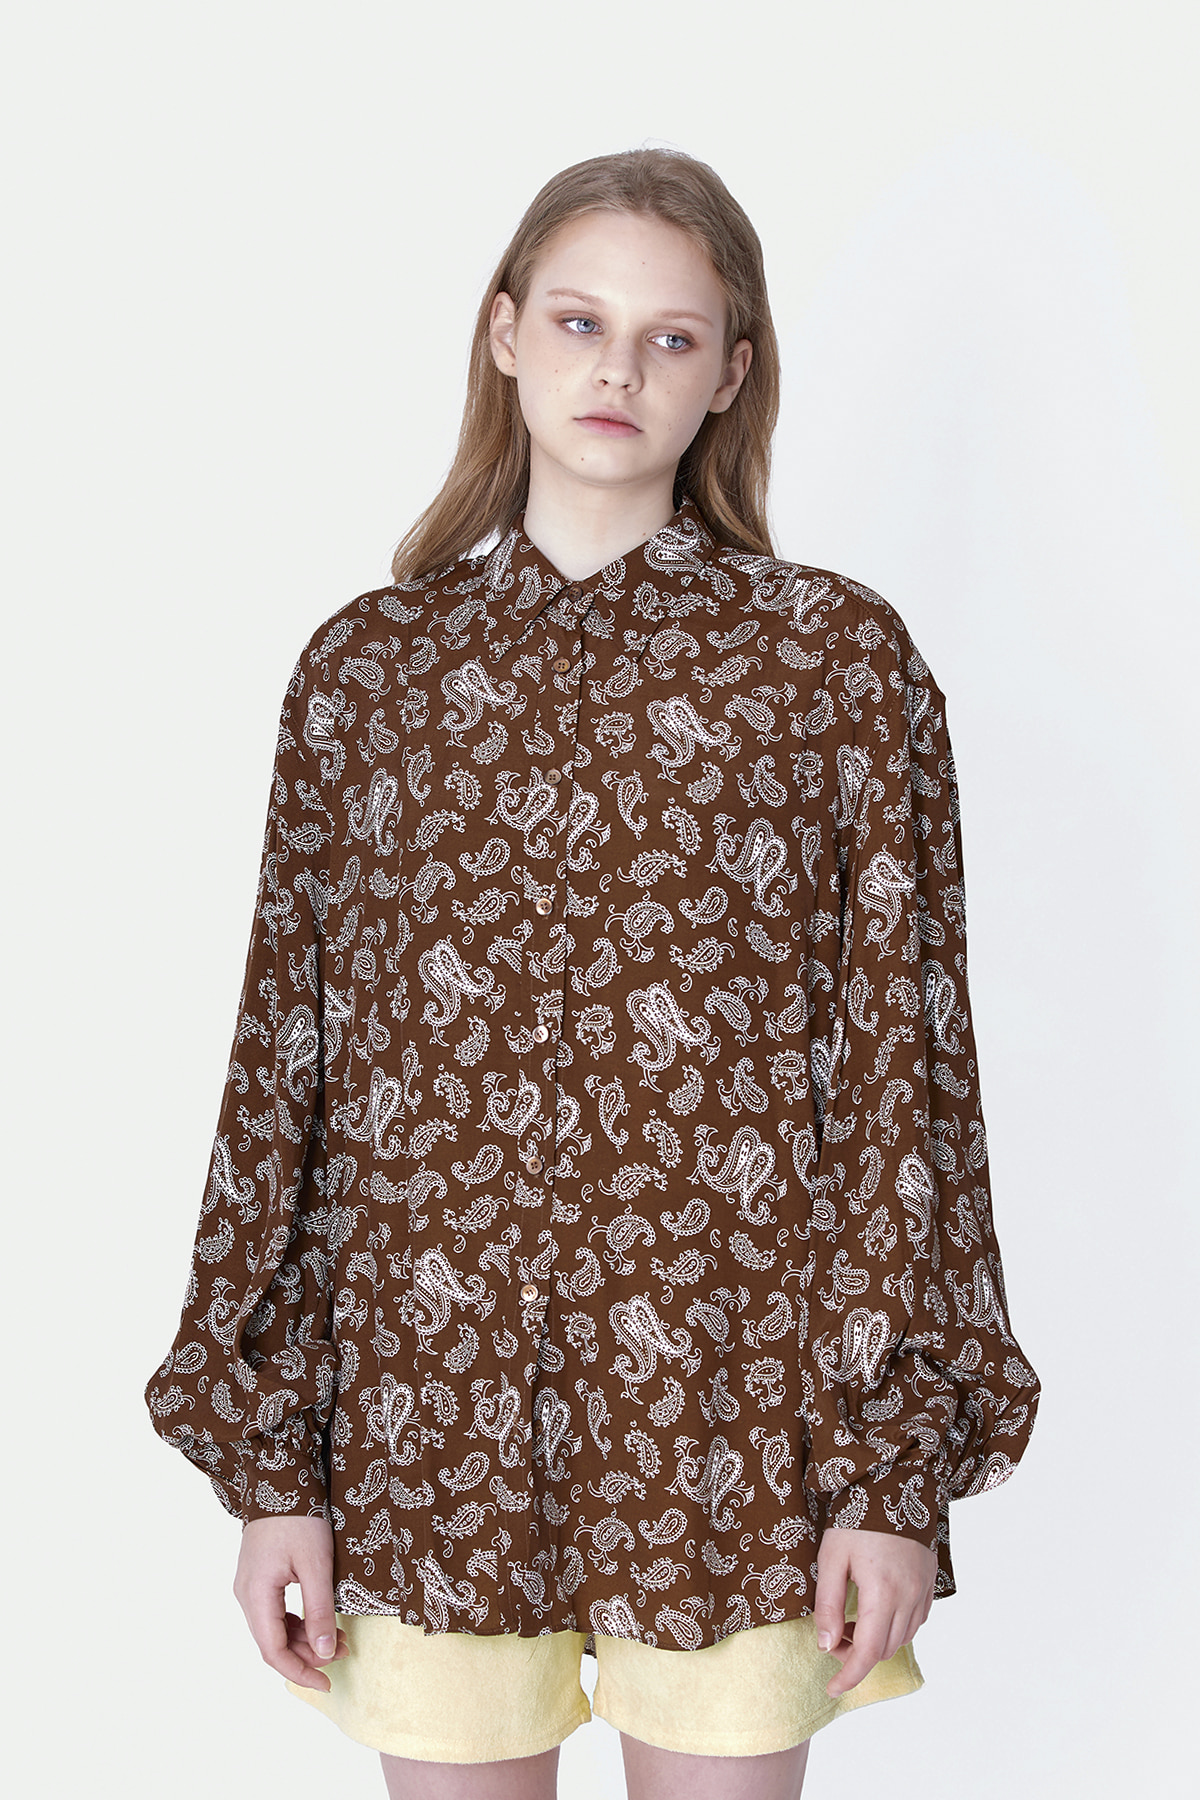 WEAR I AM Paisley Blouse (Brown)